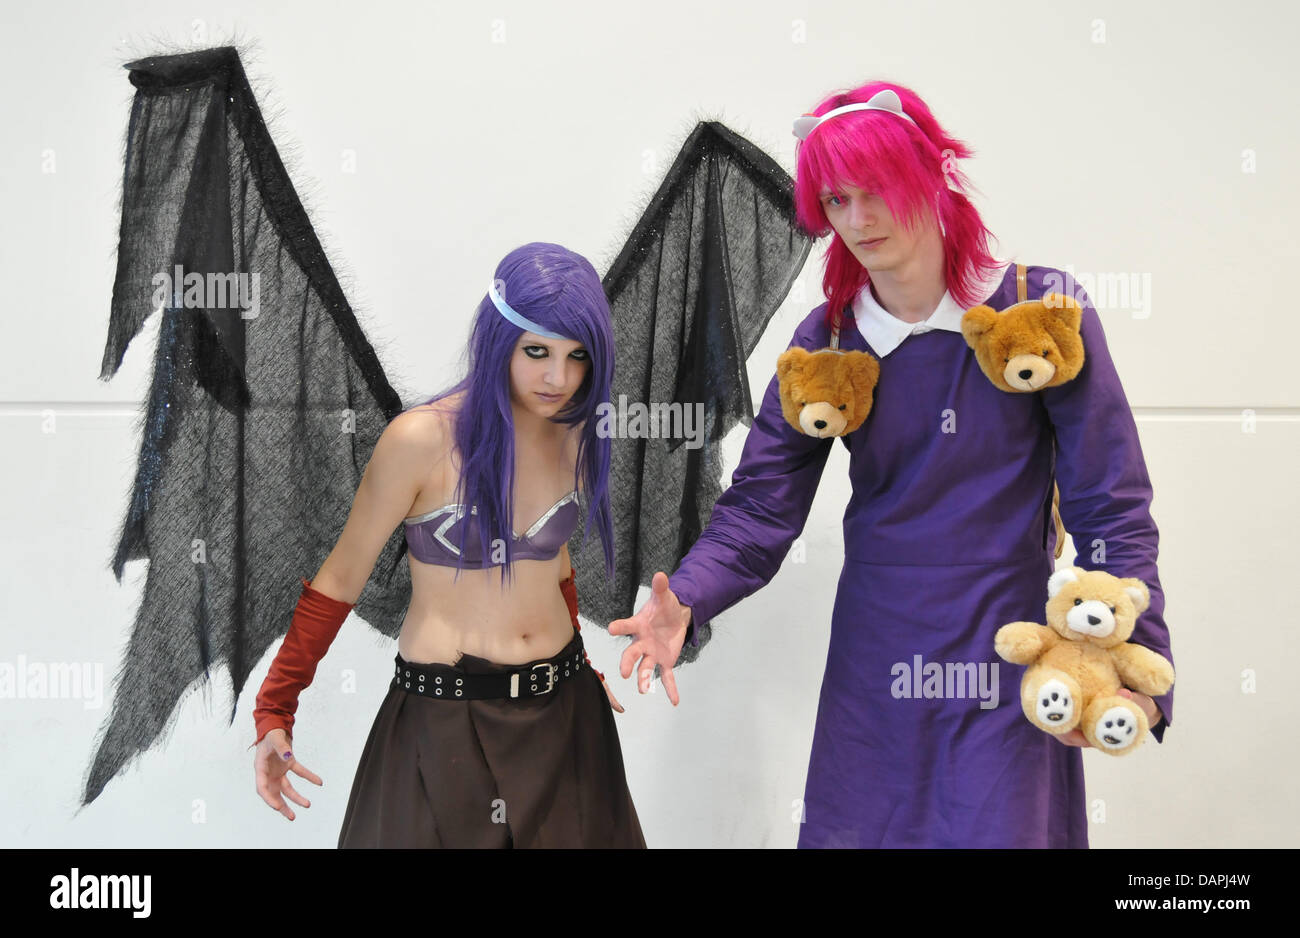 A computer game fan dressed as Morgana (L) and Annie from the computer game 'League of Legends' pose at the computer convention Gamescom in the Nintendo game area in Cologne, Germany, 21 August 2011. Gamescom in Cologne, Europe's largest game convention with 550 exhibitors showing the new trends in online games and 3D animation, had a storm of visitors on its closing weekend (20/21 Stock Photo